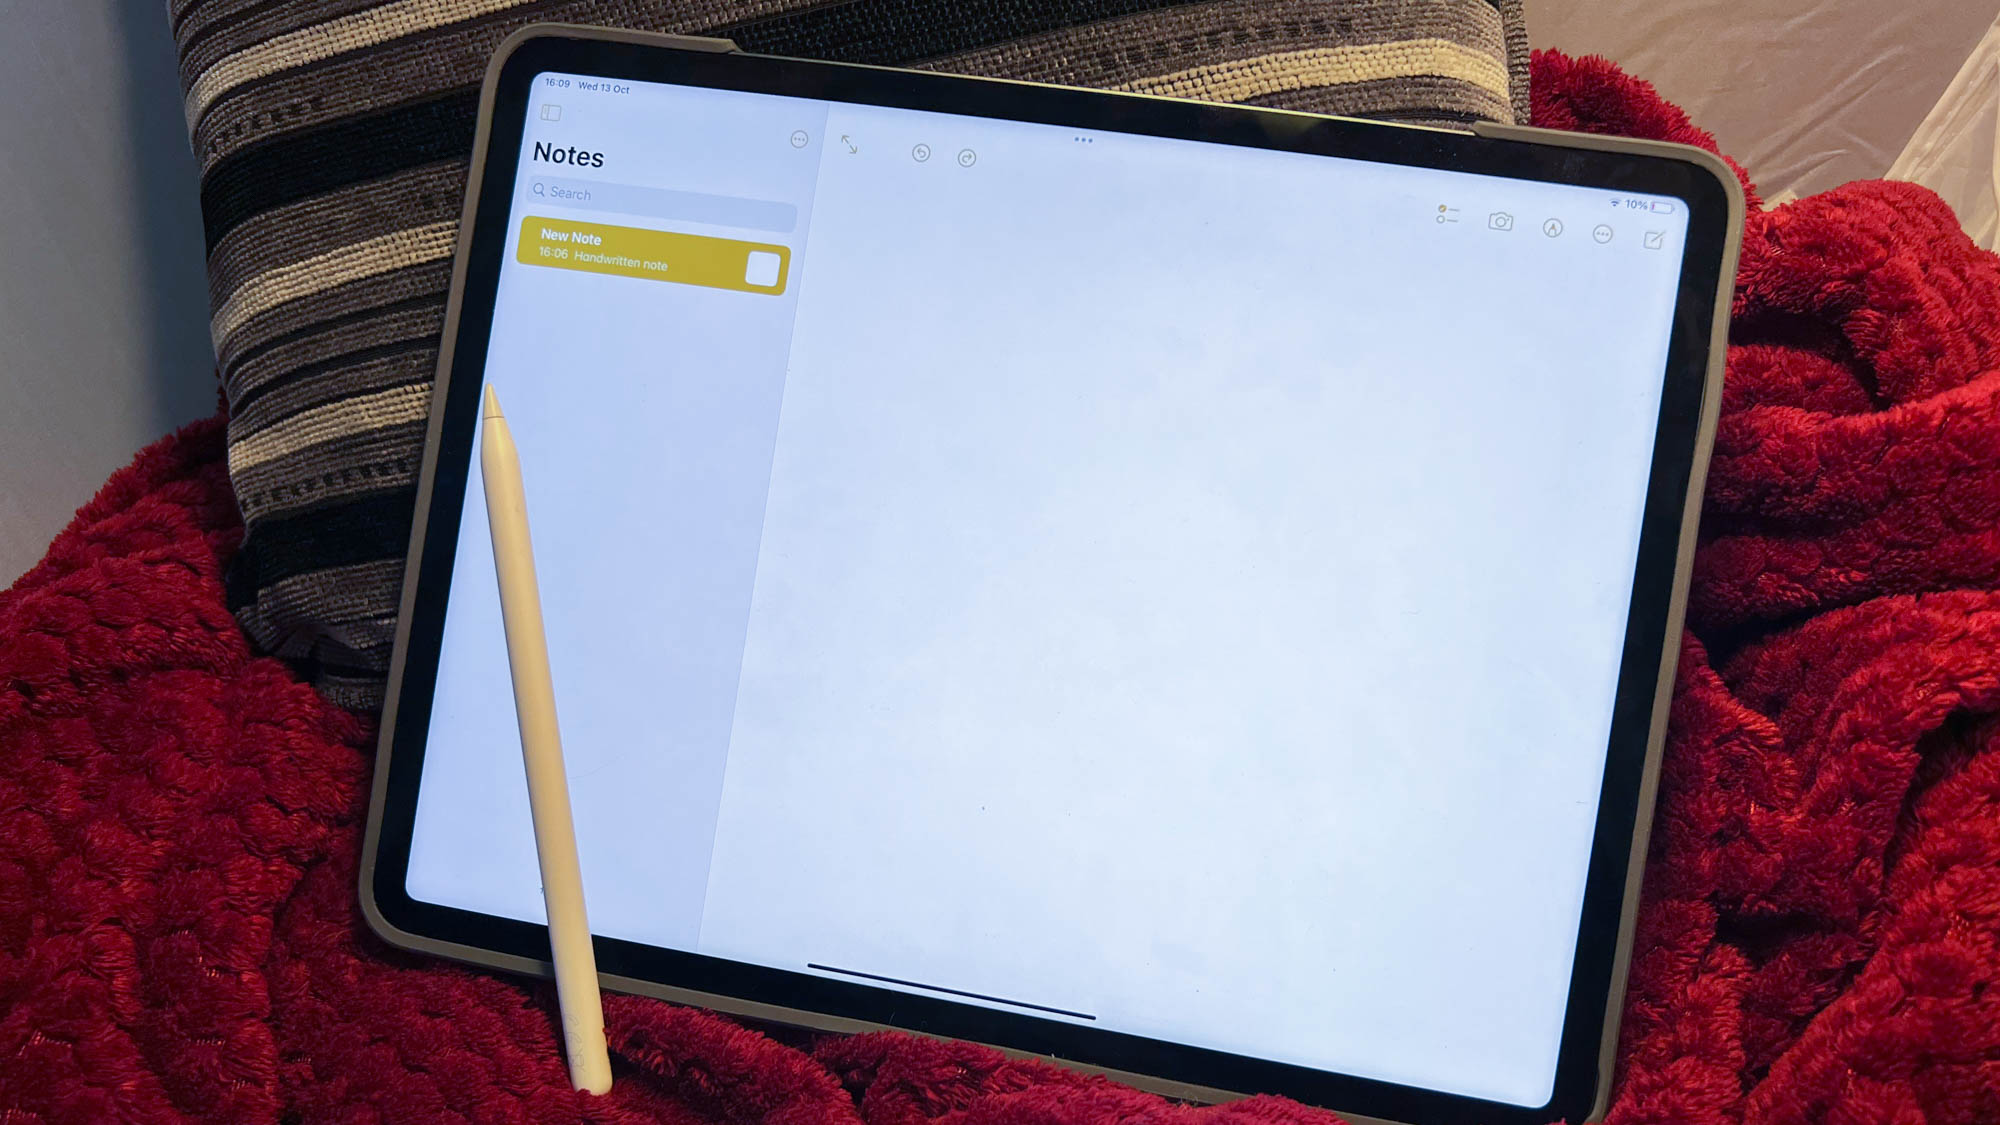 A photograph of the 12.9in Apple iPad Pro's Notes app with the Apple Pencil